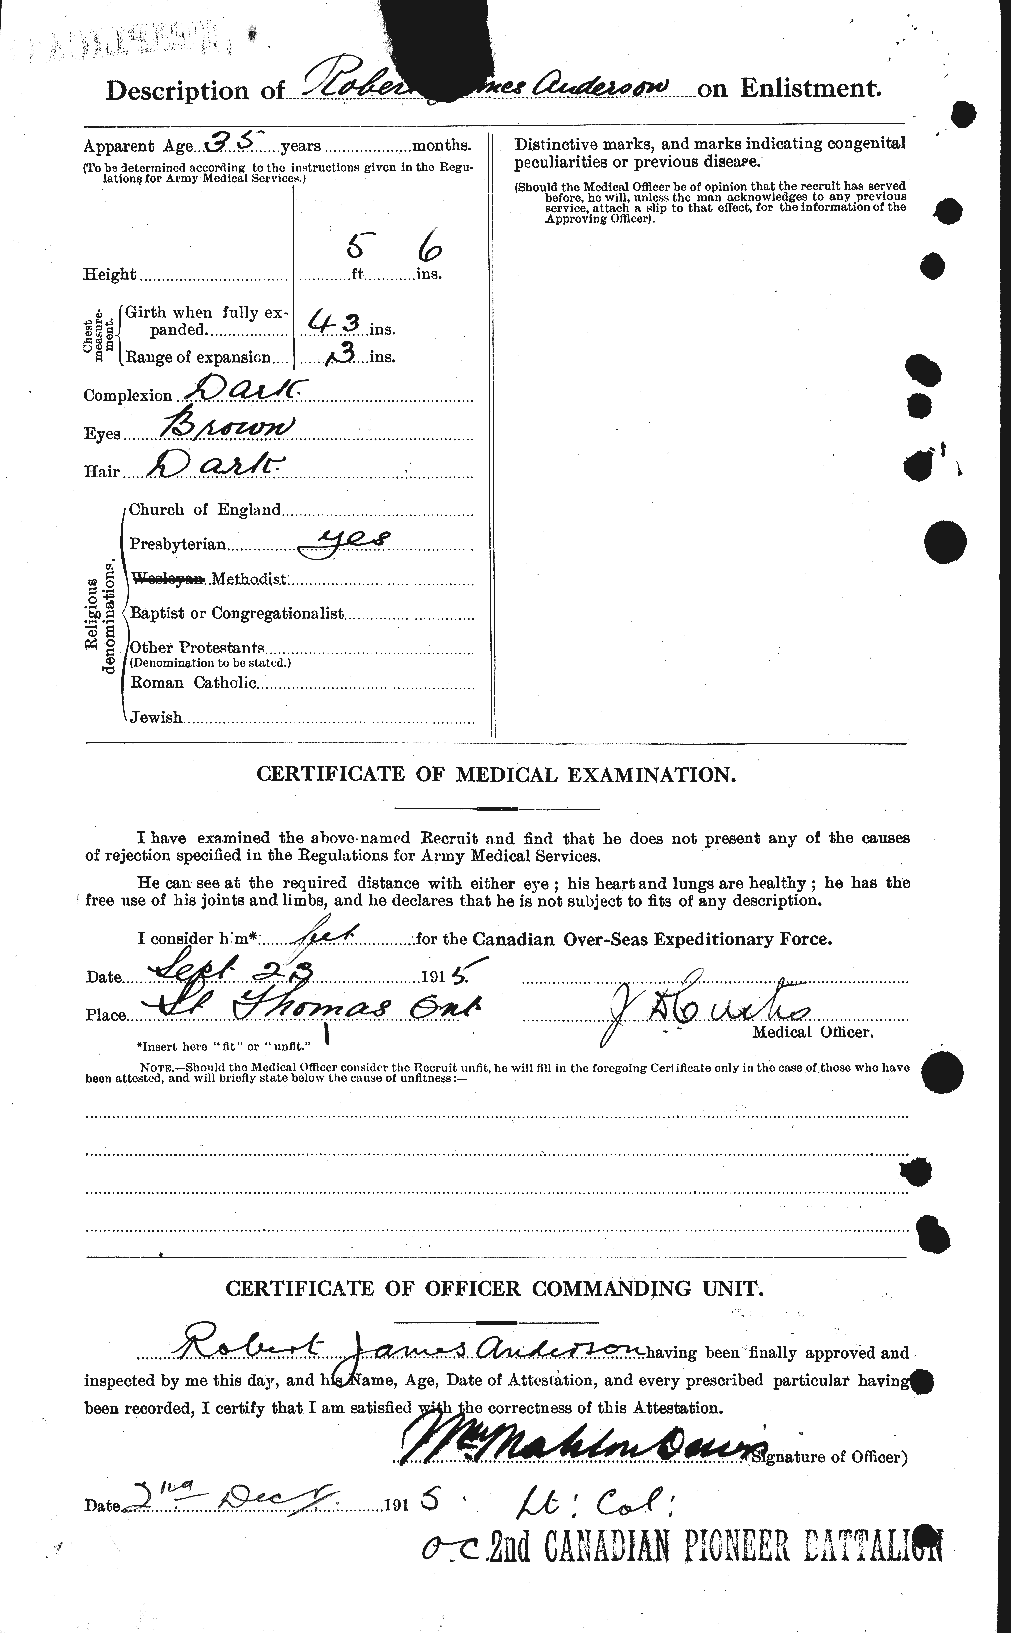 Personnel Records of the First World War - CEF 207243b